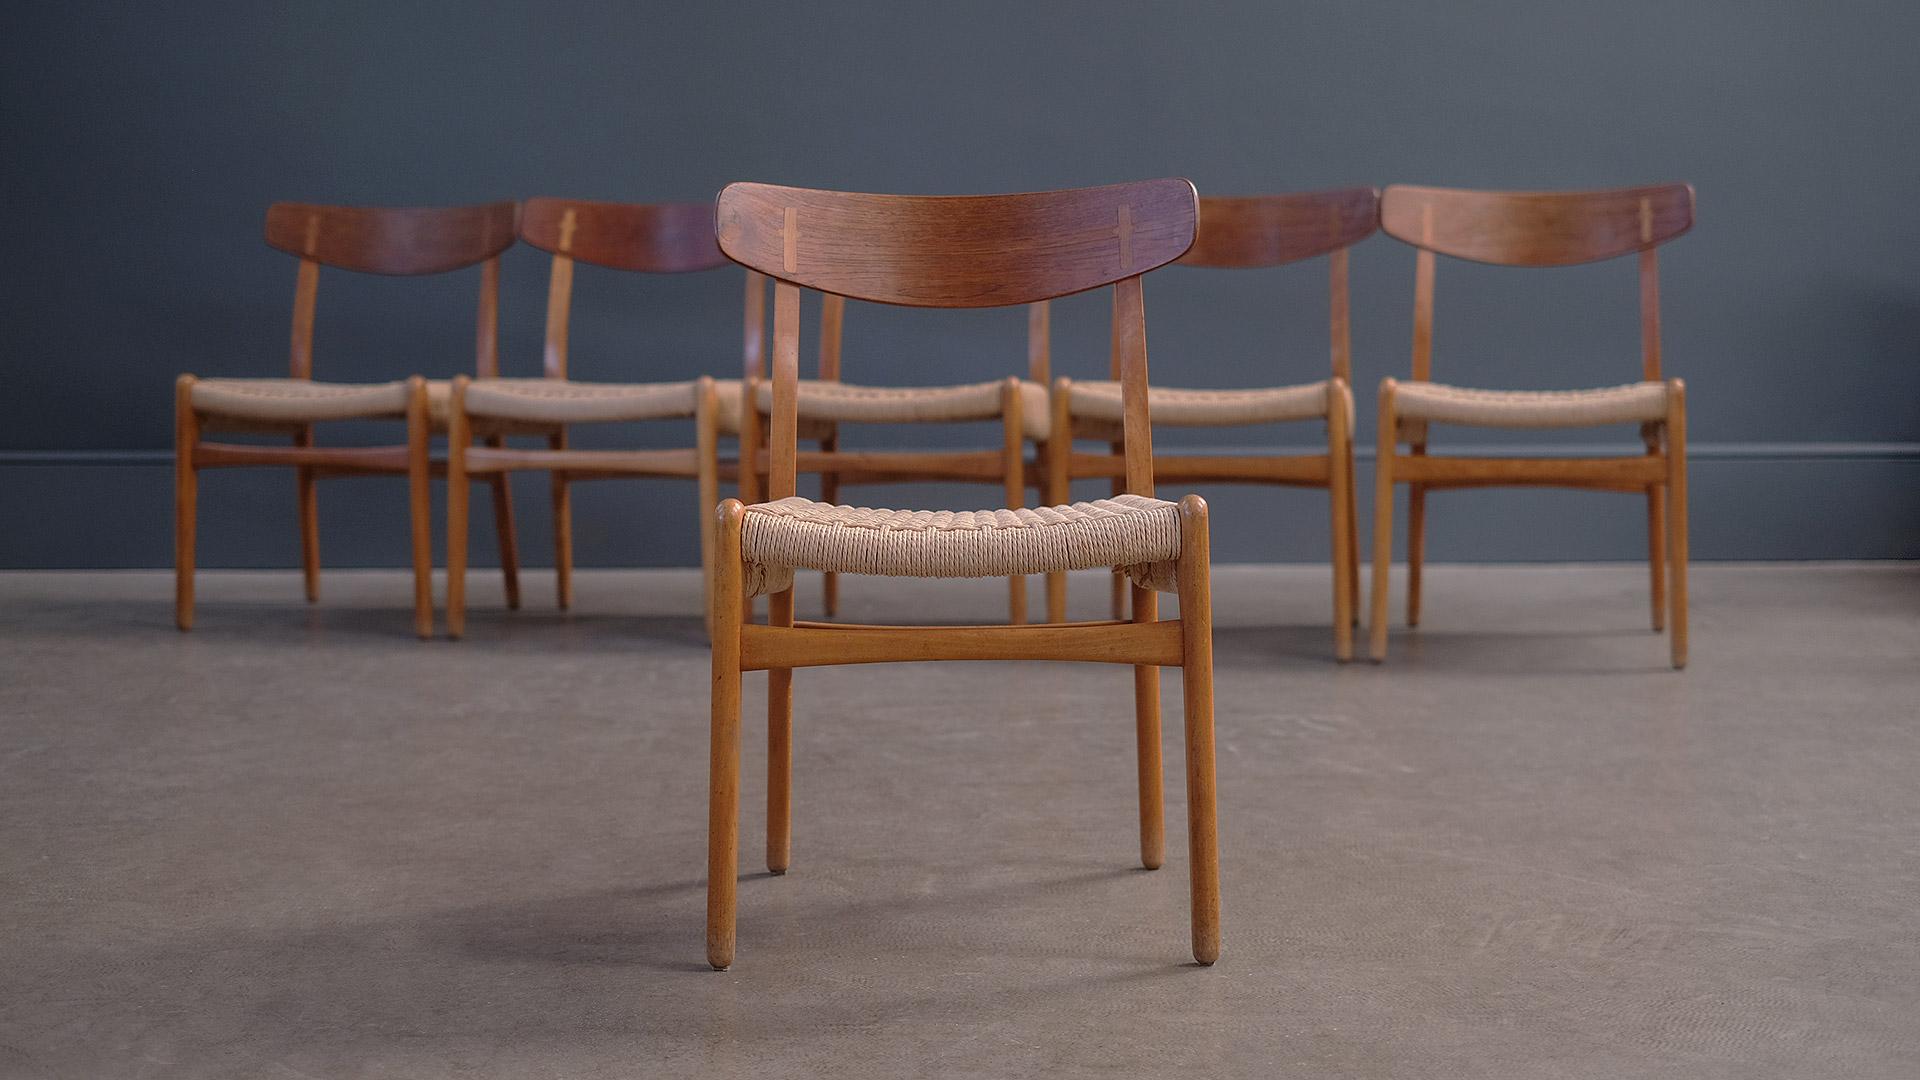 Beautiful set of 6 dining chairs designed by Hans Wegner for Carl Hansen, Denmark. Wonderful condition in solid beech with contrasting teak backrest and exposed joint detail. Superb set of chairs.